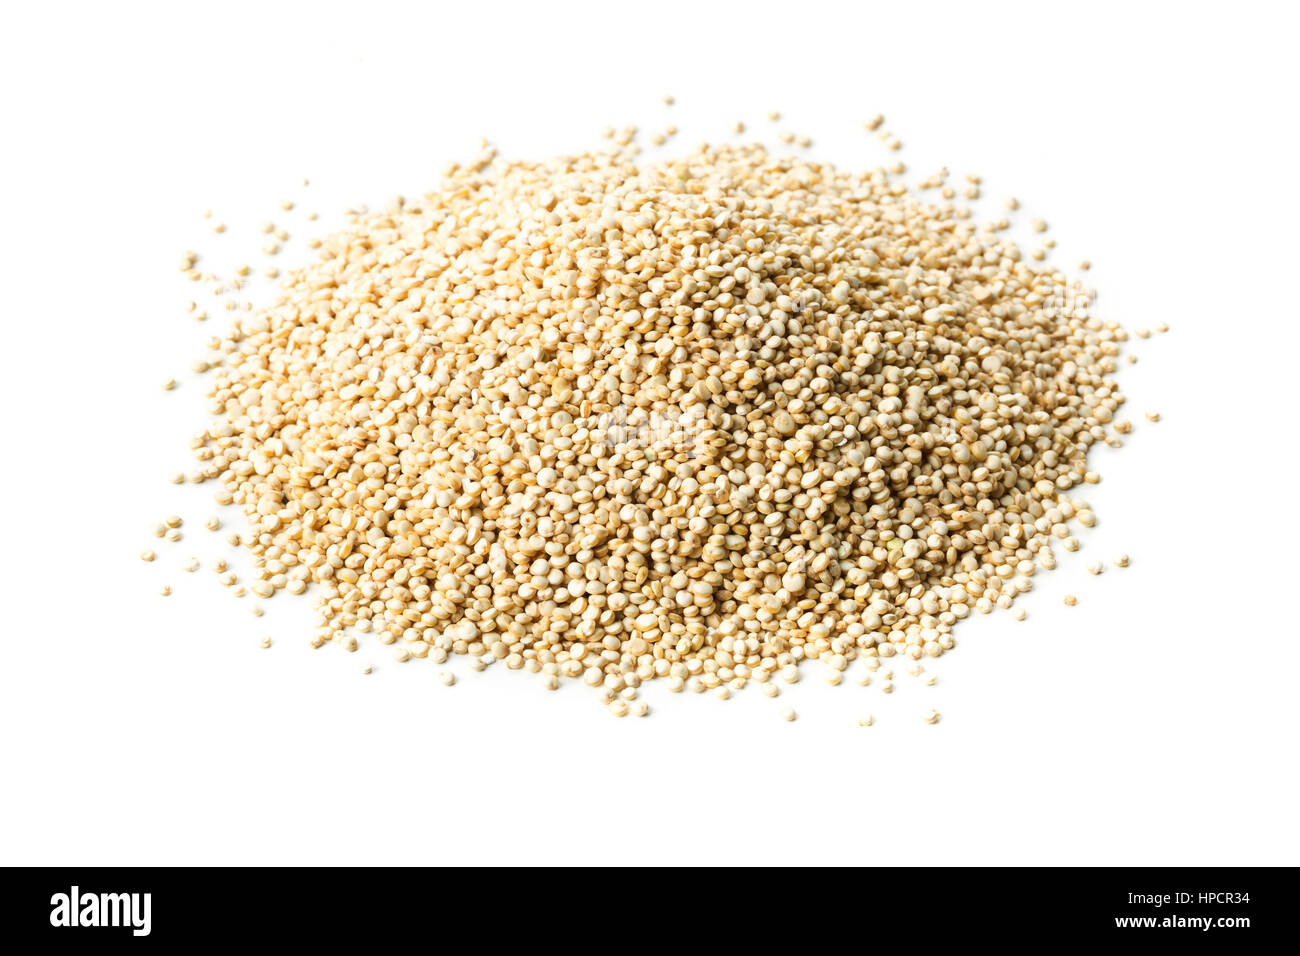 Heap of raw, uncooked quinoa seed on white background Stock Photo